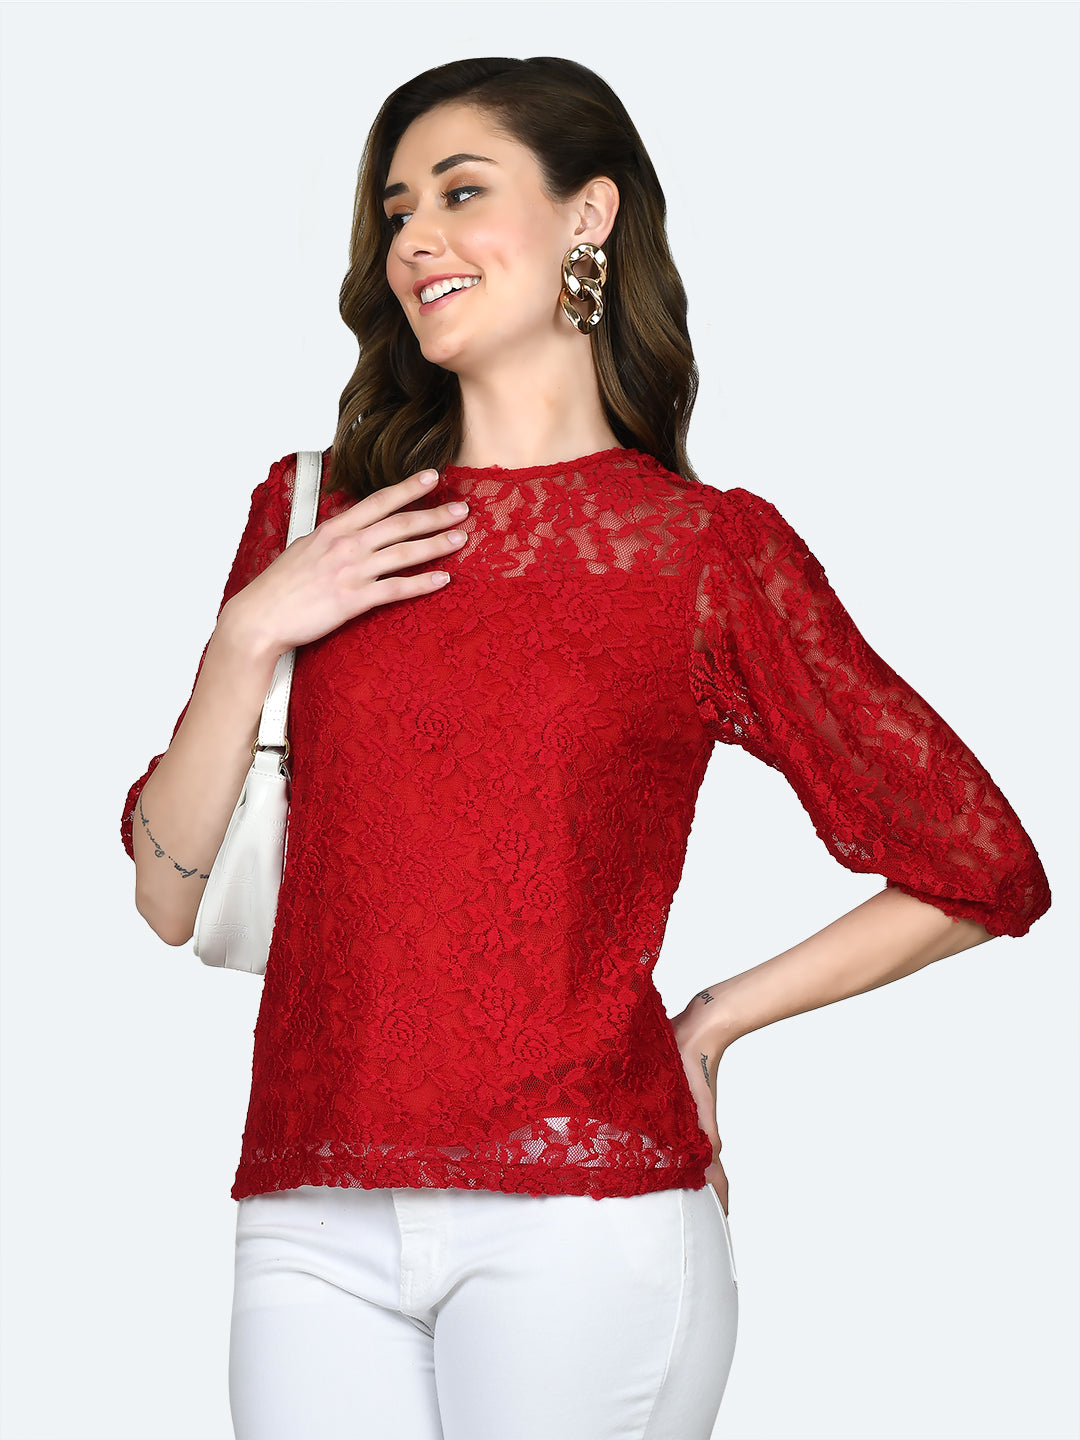 Red Lace Top For Women